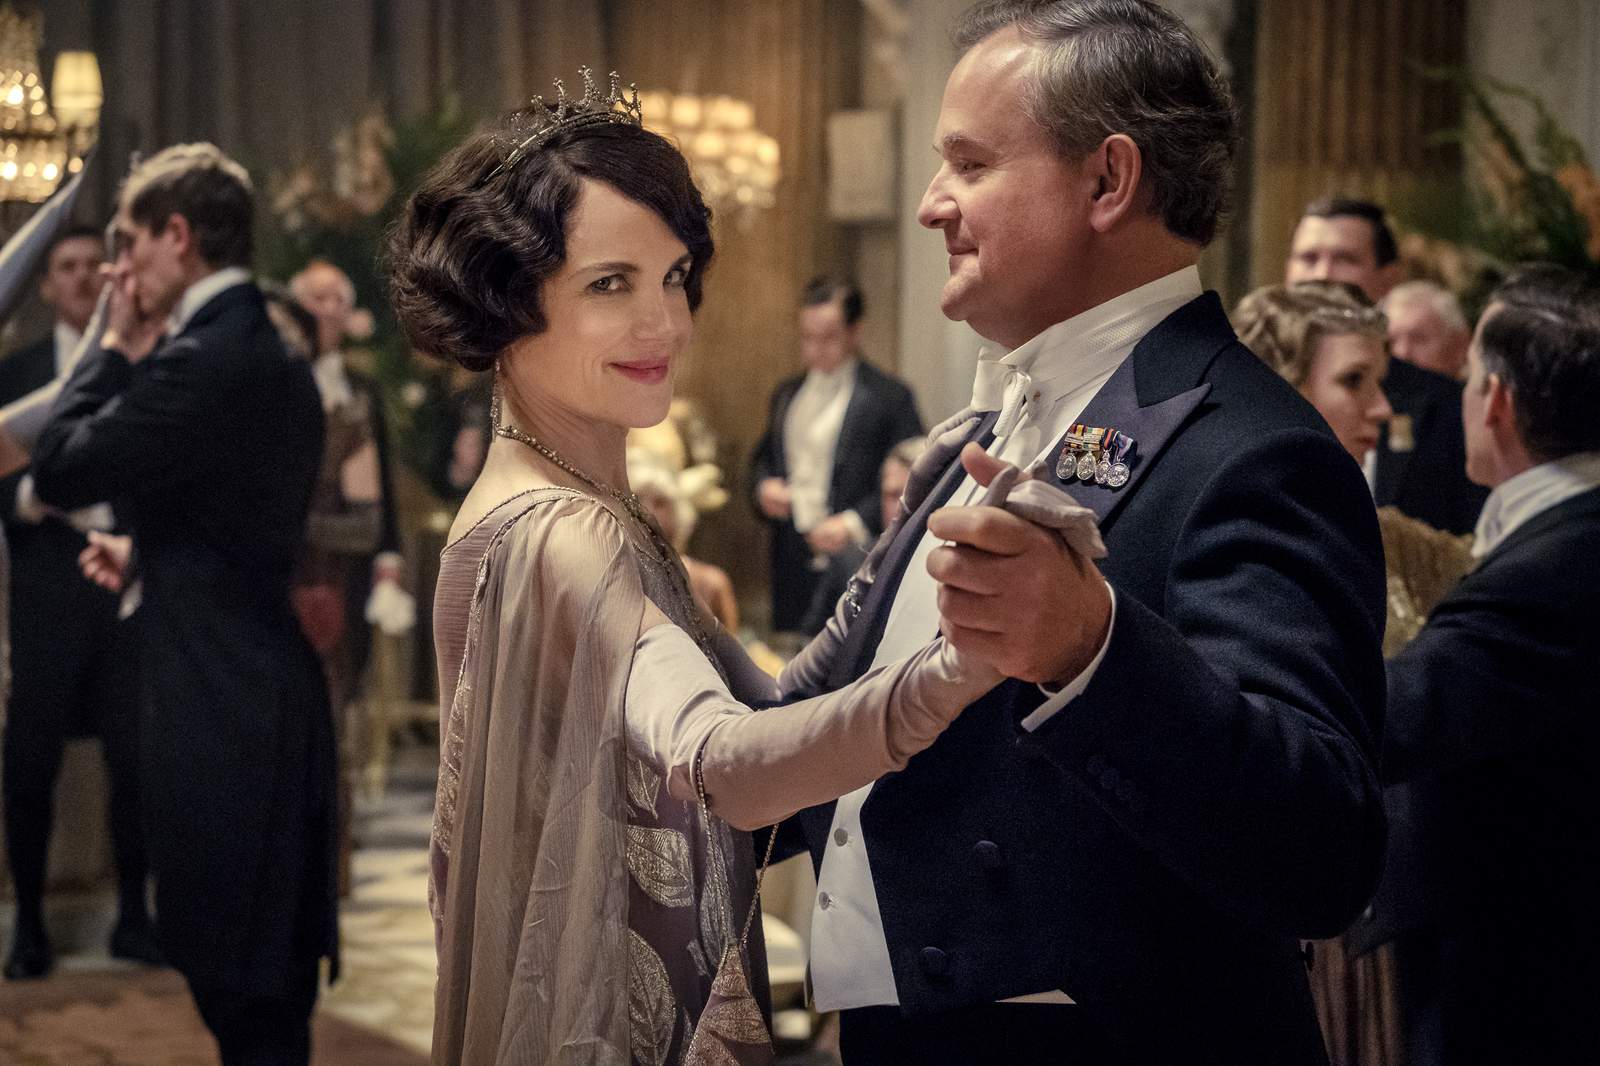 'Downton Abbey' cast returns for sequel opening in December